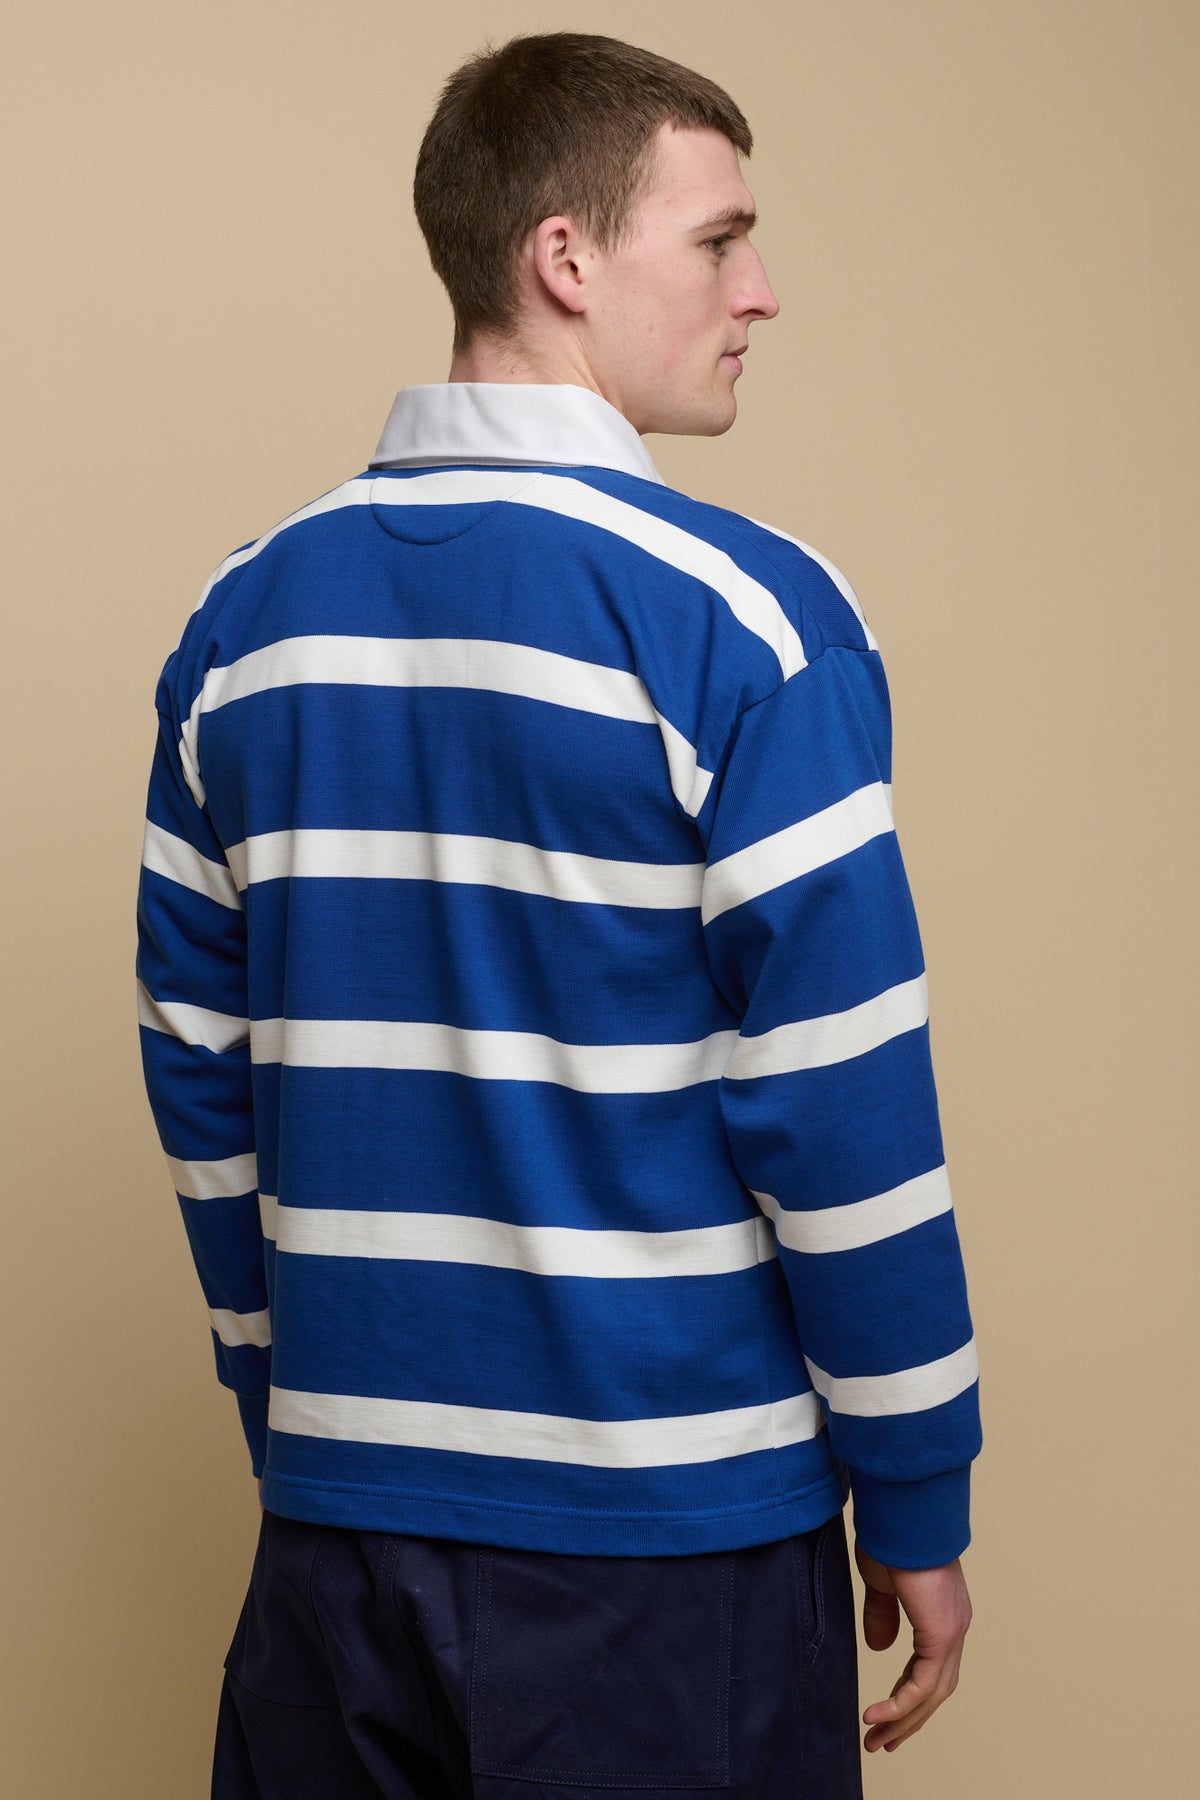 
            Thigh up image of the back of brunet male wearing stripe rugby shirt in blue and white 